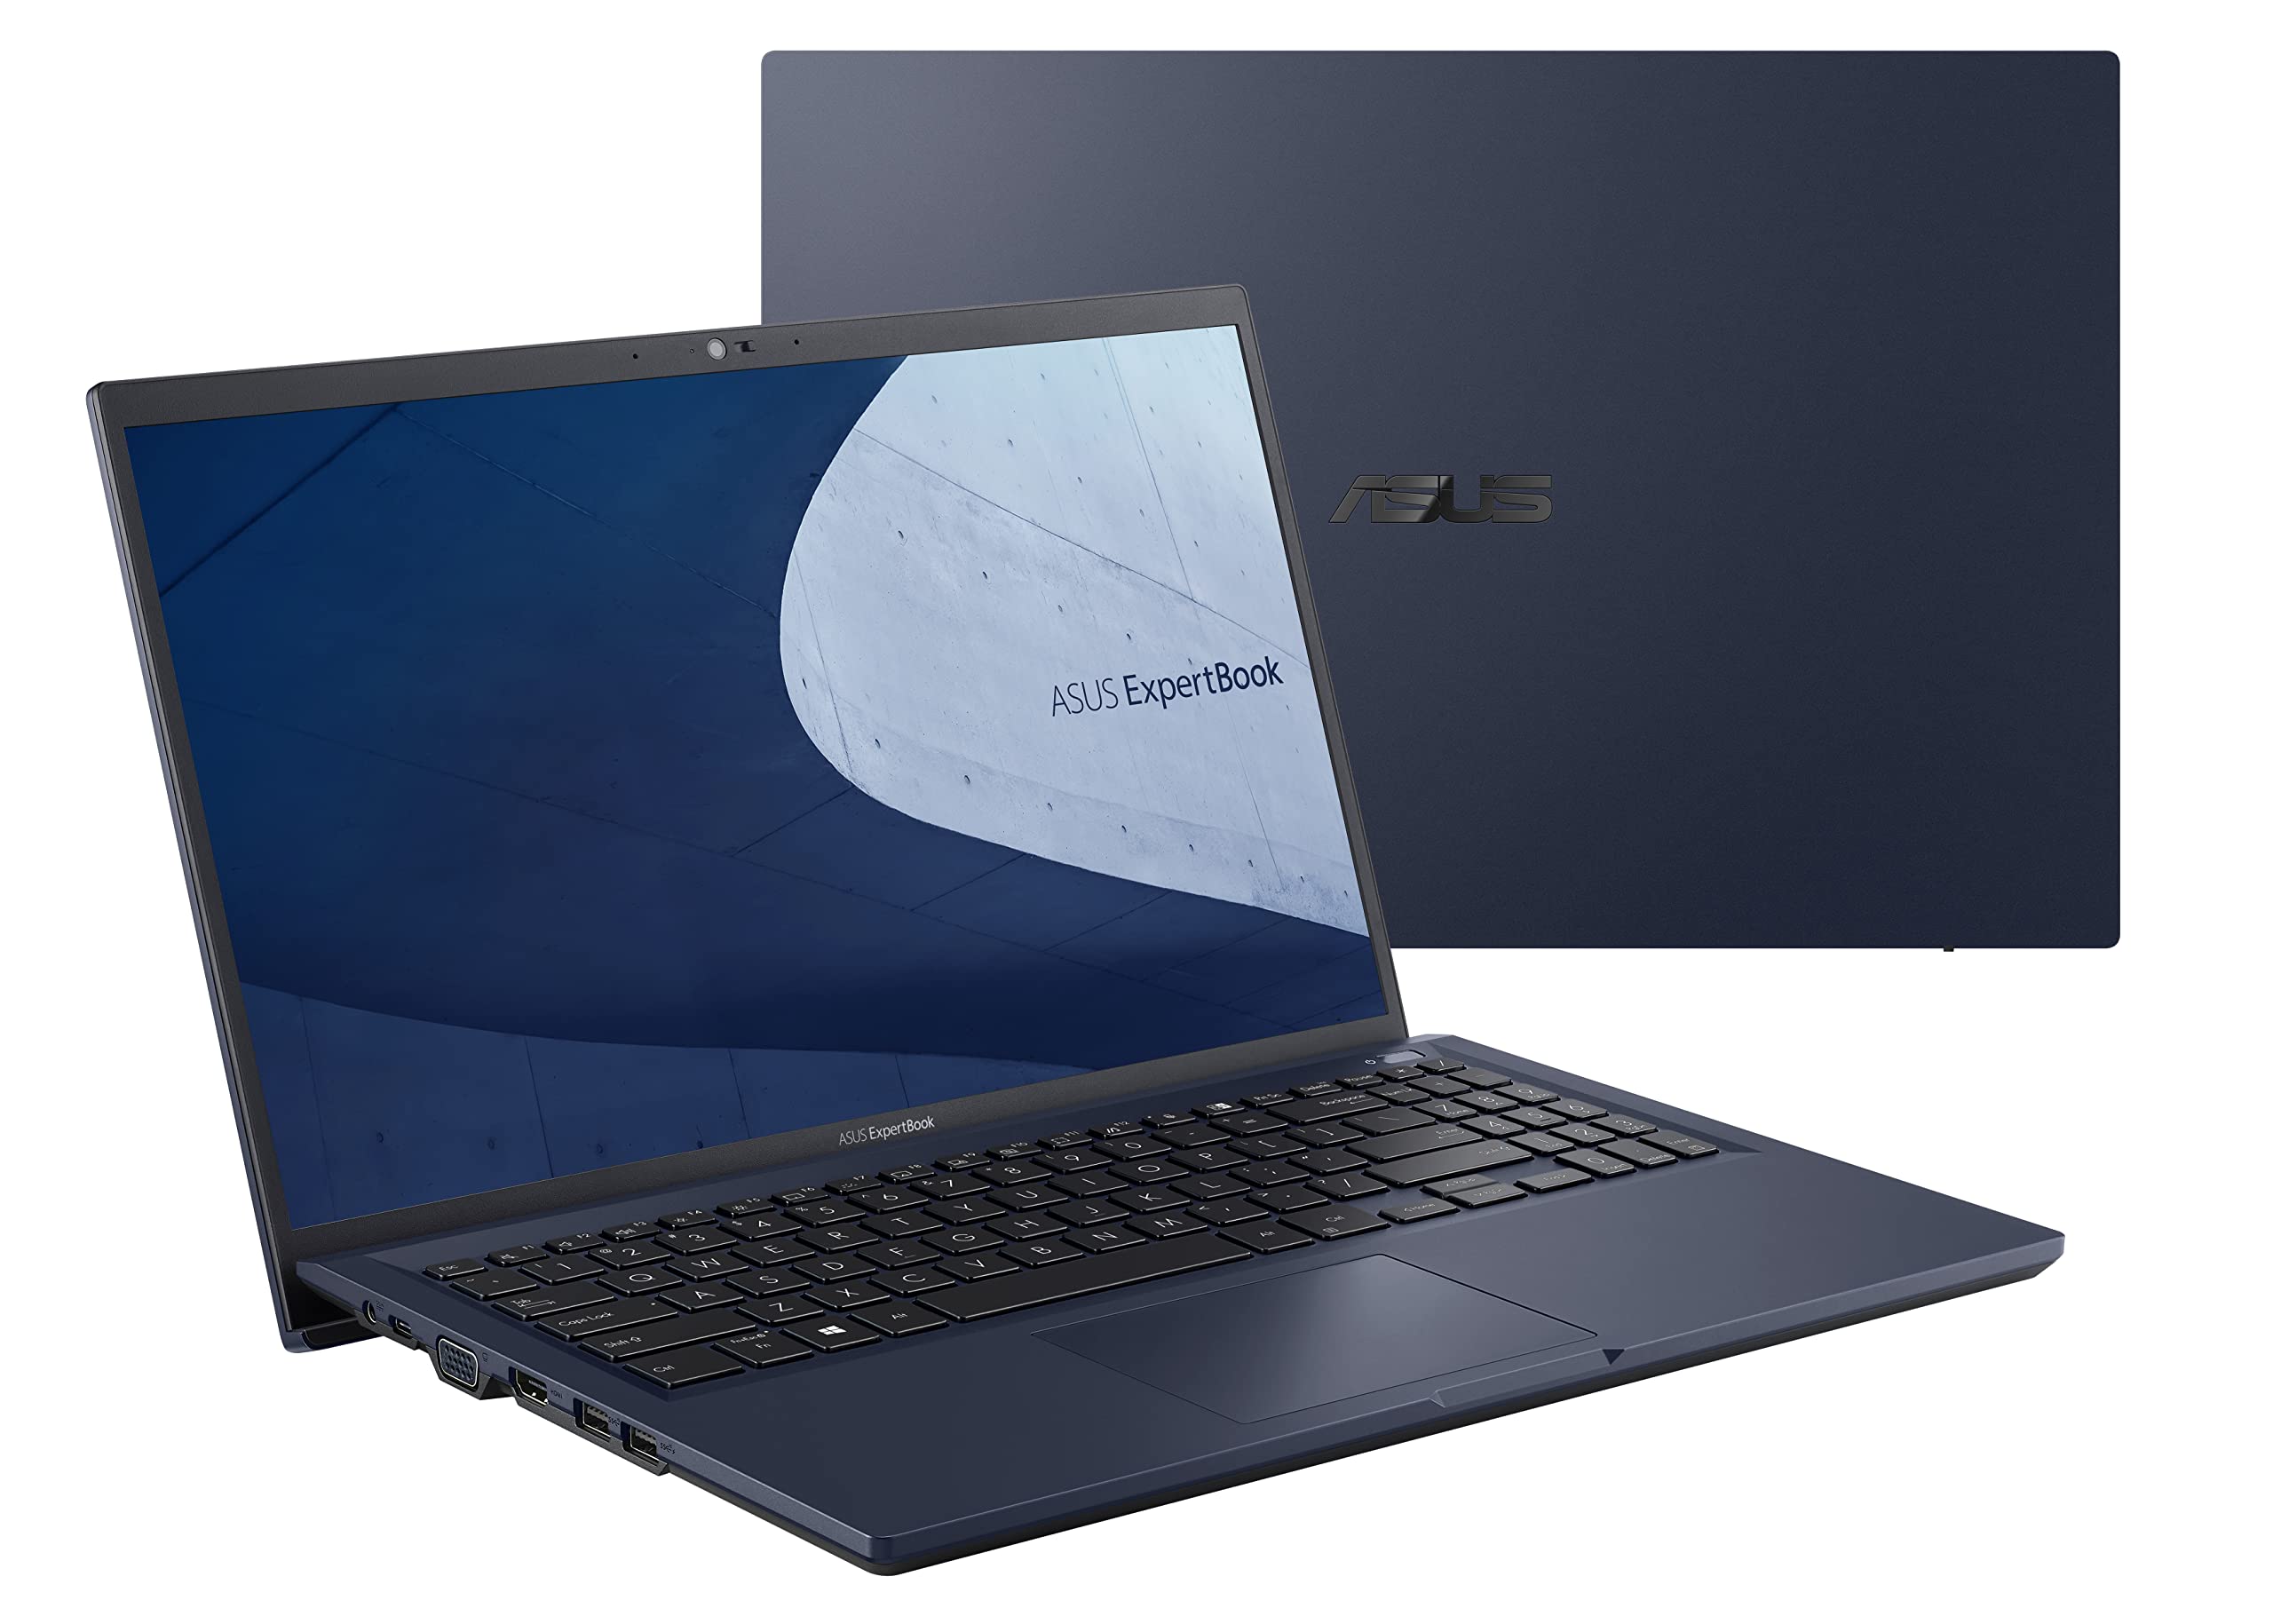 ASUS ExpertBook B1 Business Laptop, 14” FHD, Intel Core i5-1135G7, 256GB SSD, 8GB RAM, Military Grade Durable, AI Noise Cancelling, Webcam Privacy Shield, Win 10 Pro, Star Black, B1400CEA-XH51